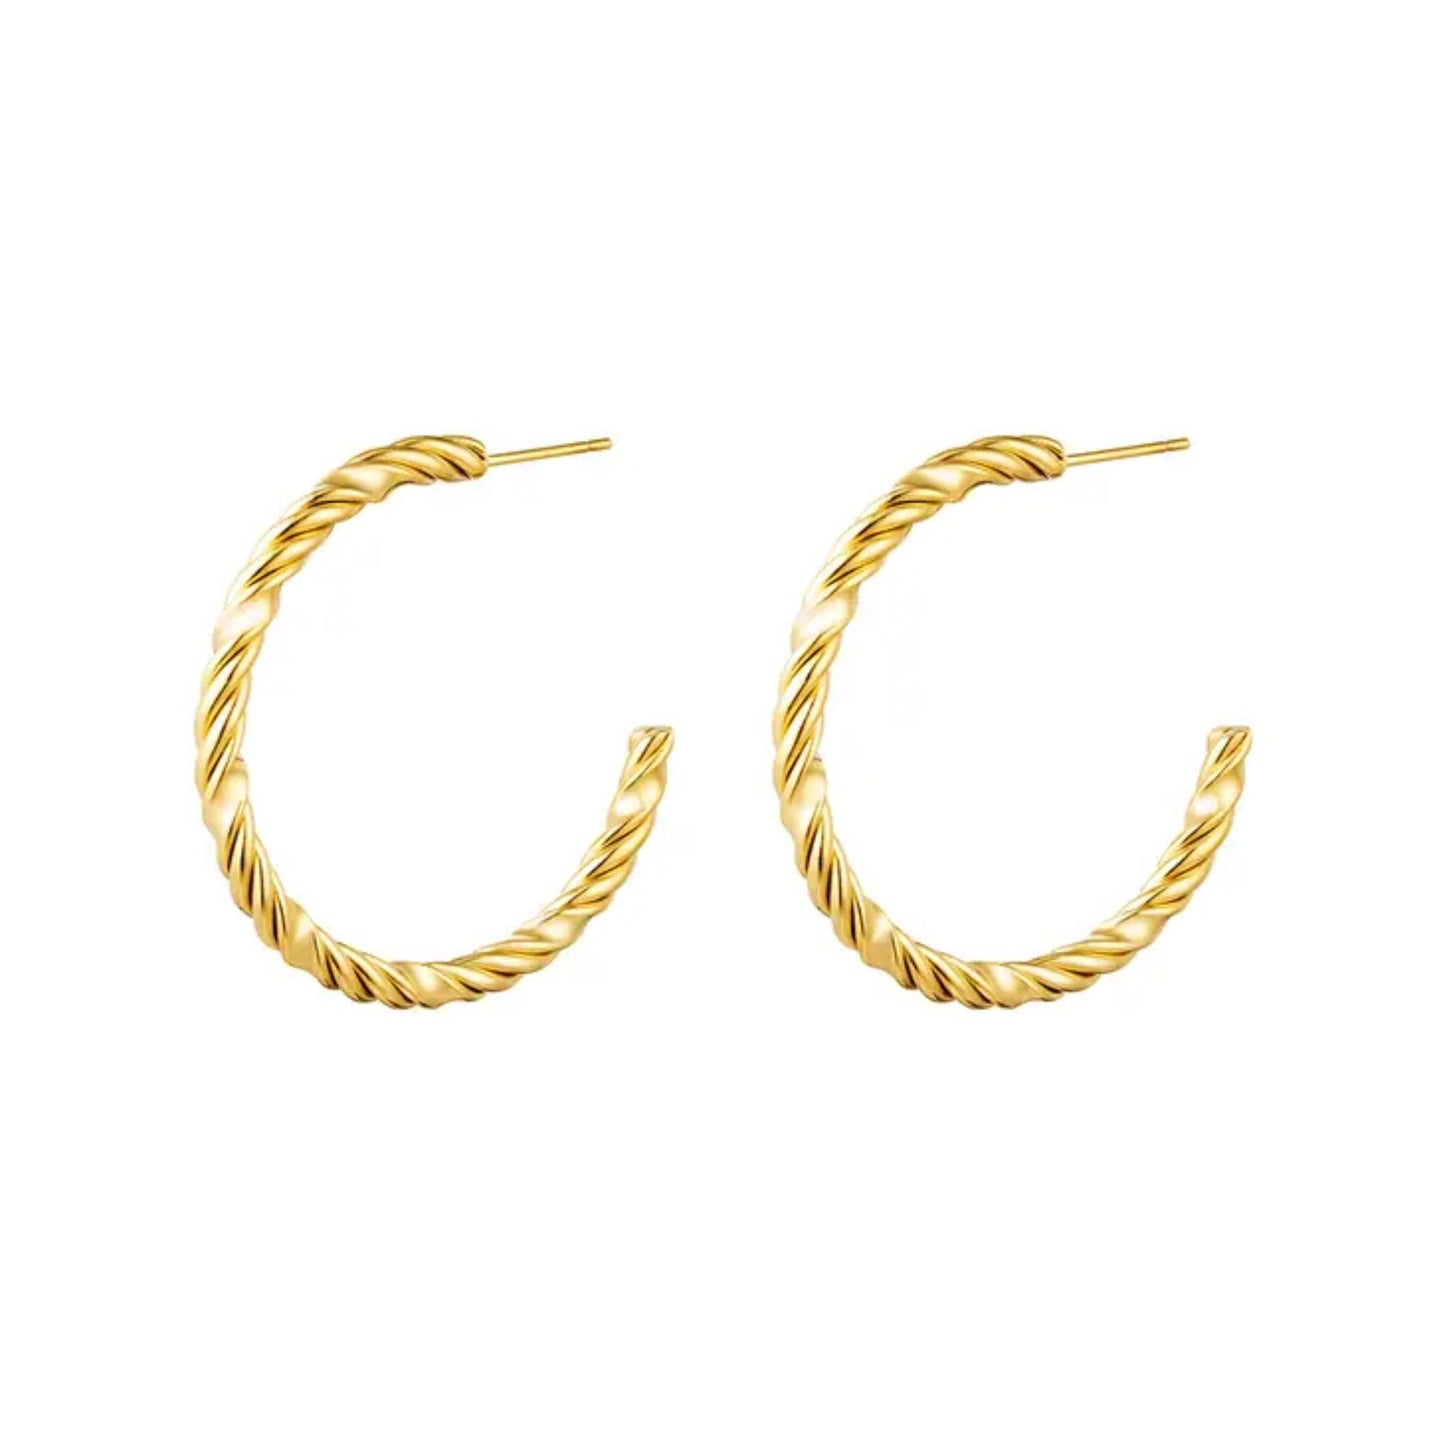 Gold Twisted Hoop Earrings (two sizes)